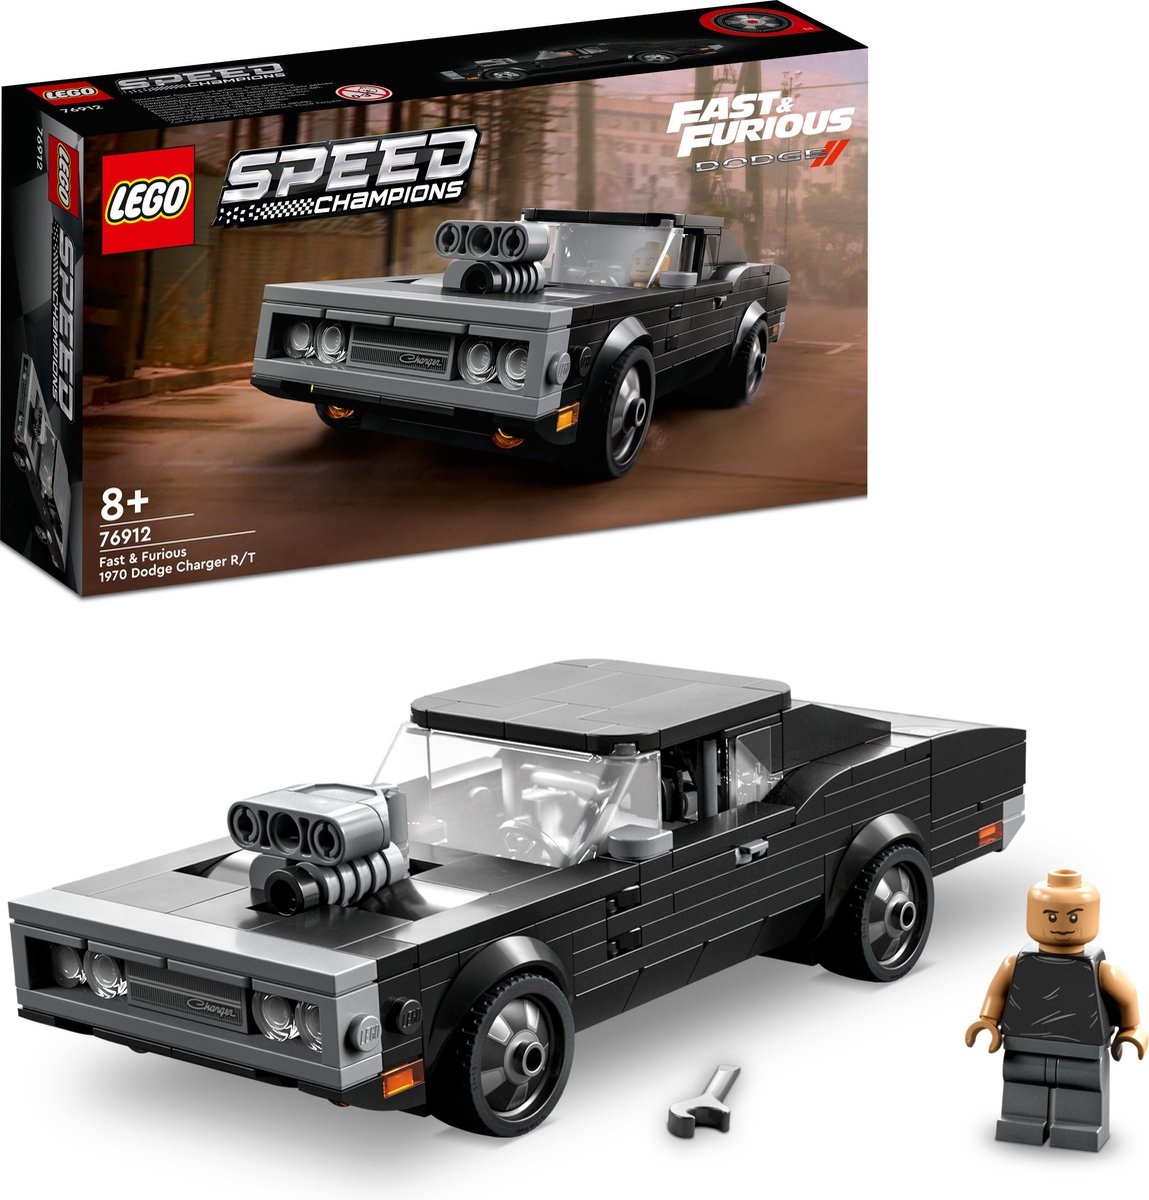 Lego LEGO Speed Champions Fast & Furious 1970 Dodge Charger R/T - 76912